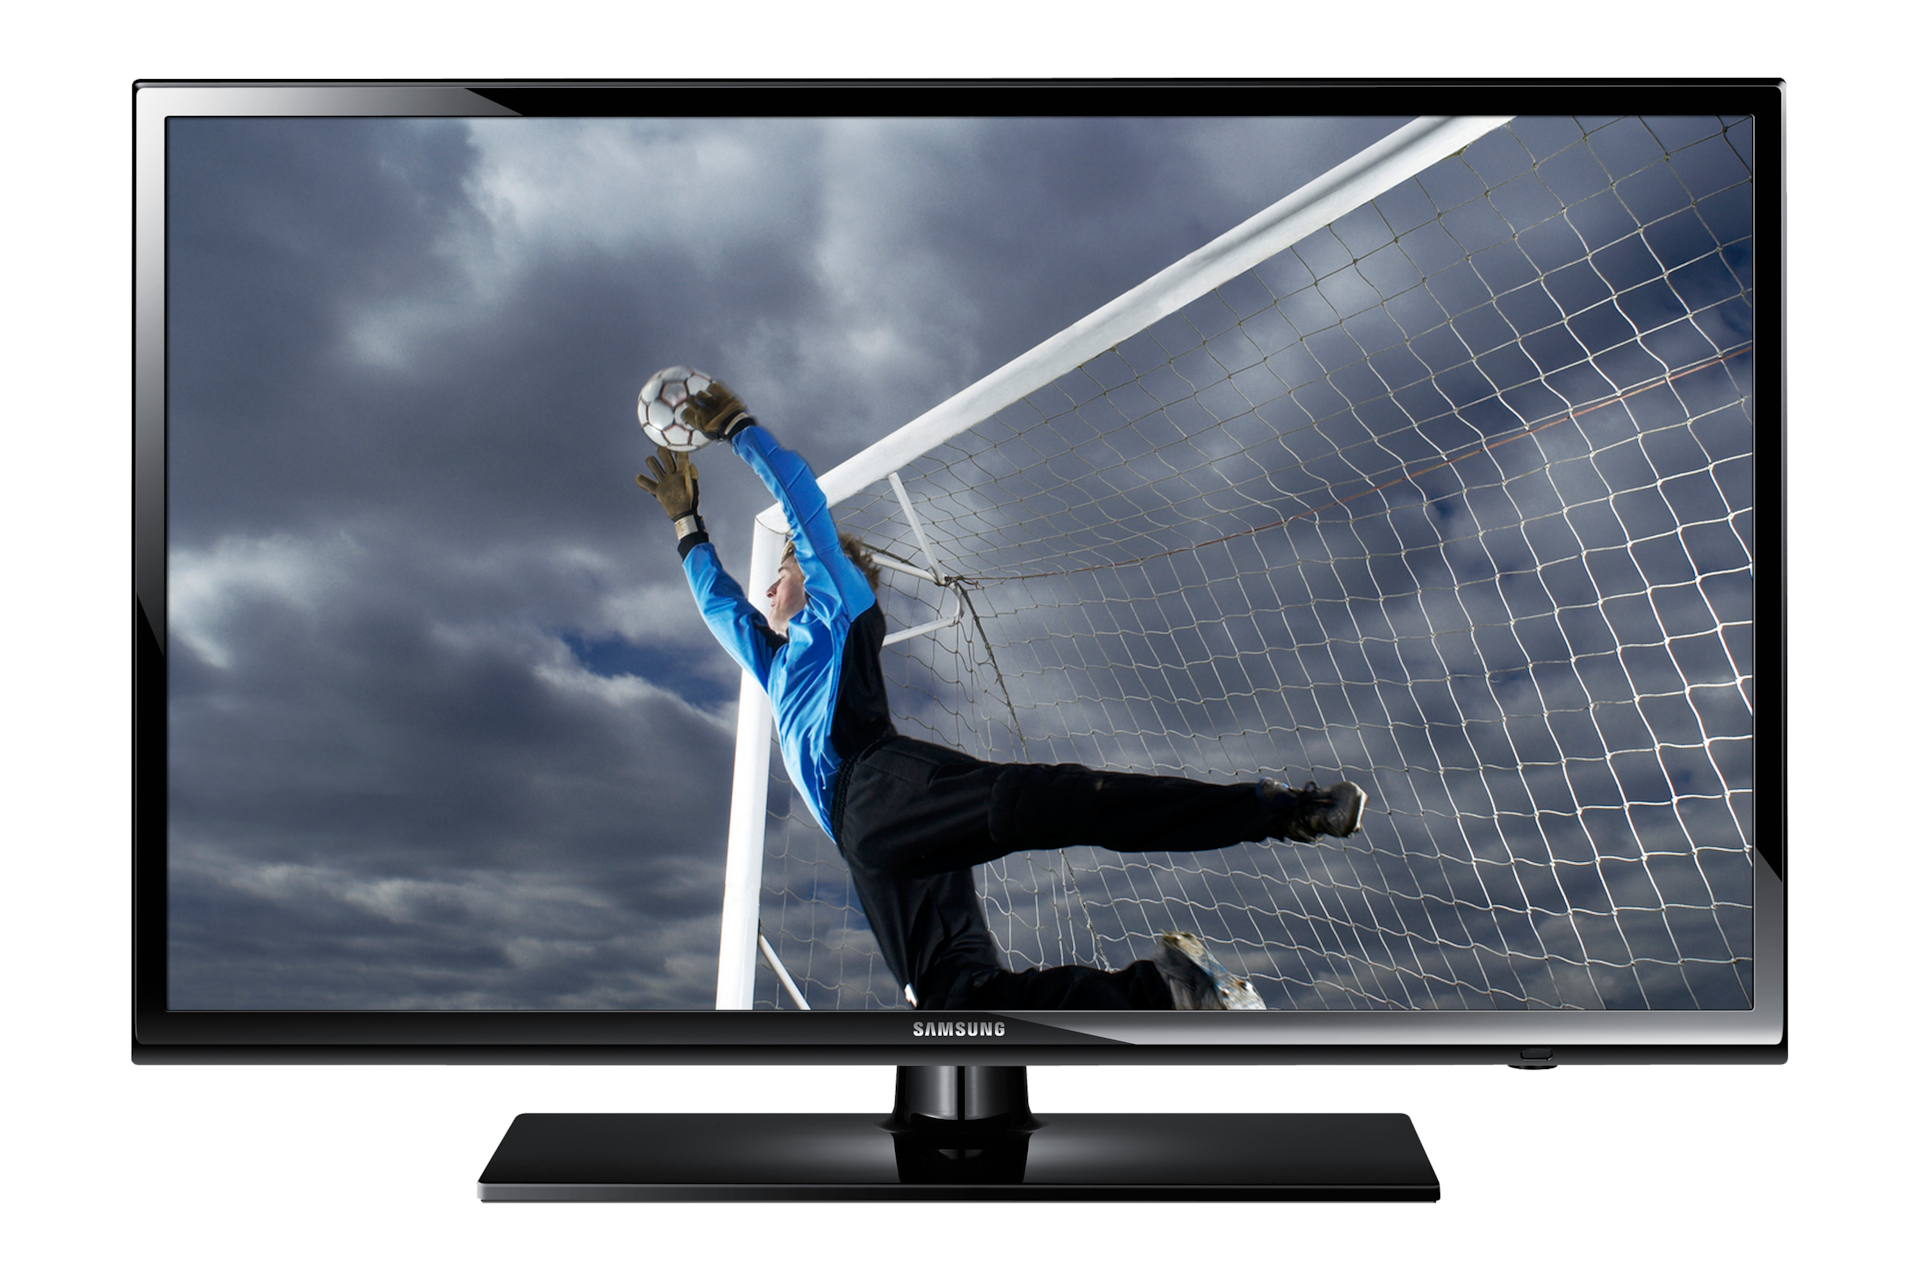 Samsung Latest 32 Inch HD LED TV Price, USB TV Features, Specifications3000 x 2000